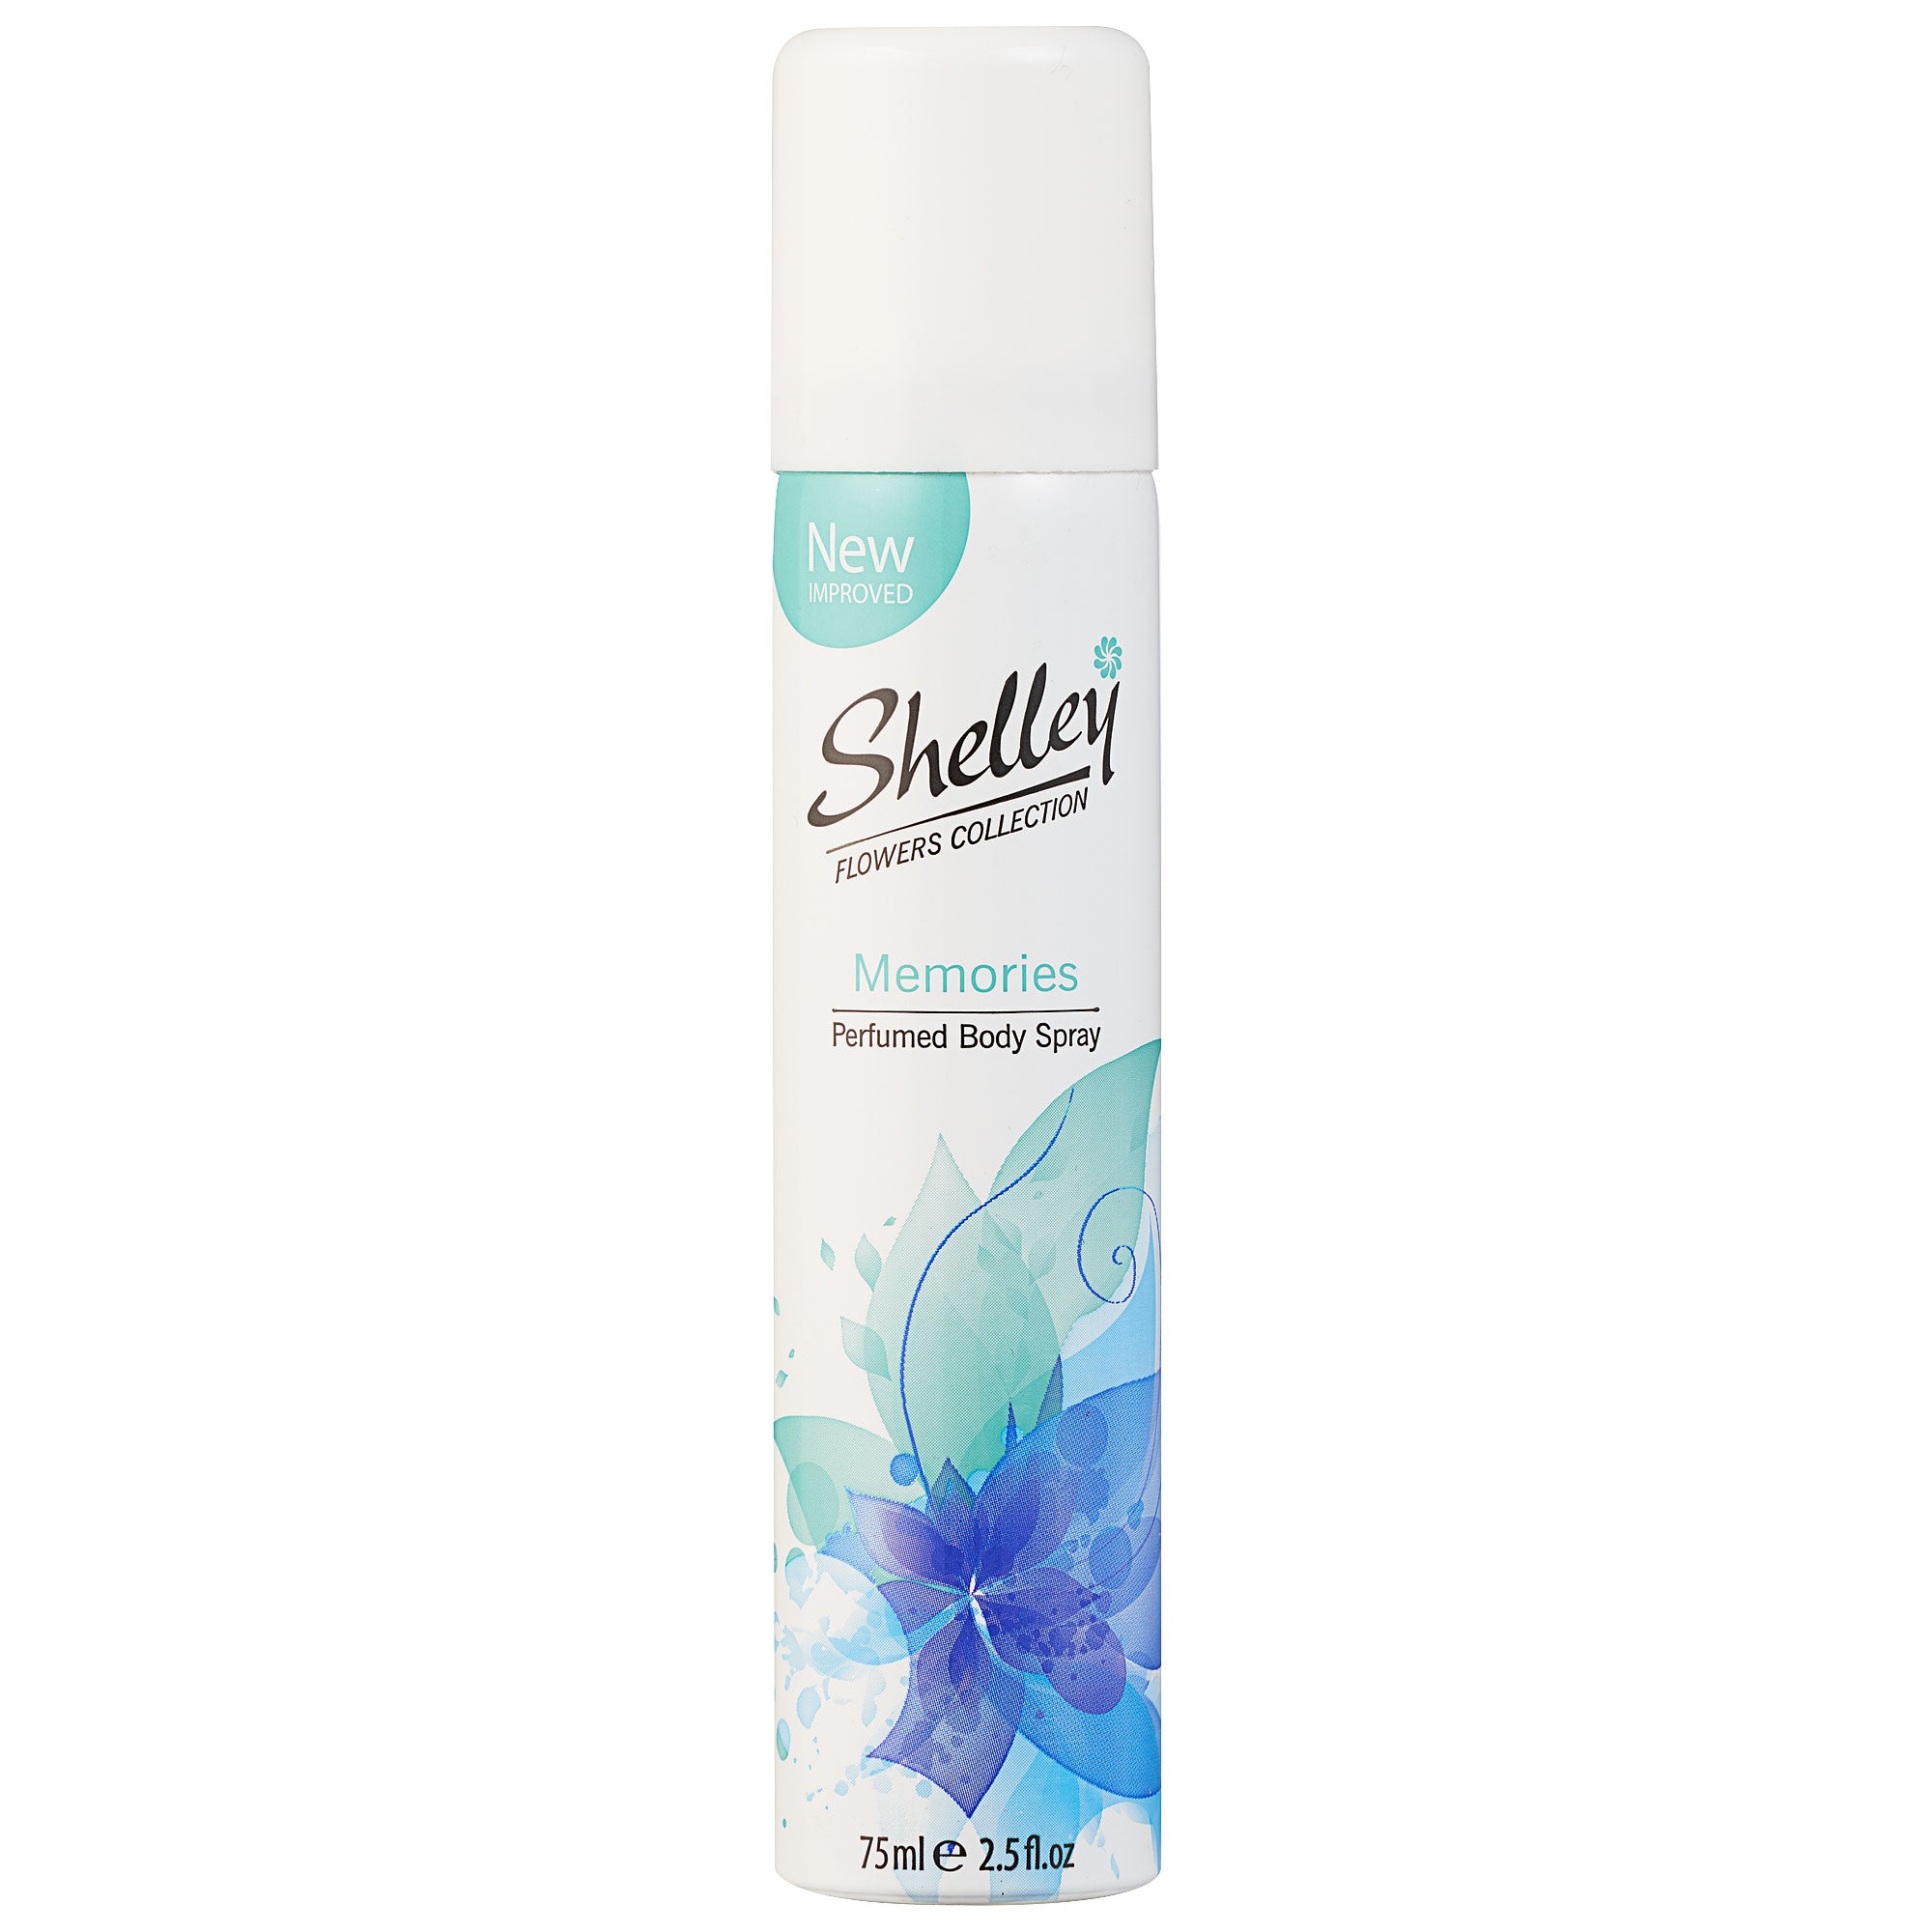 Shelley Body Spray Memories 75mL | The Reject Shop